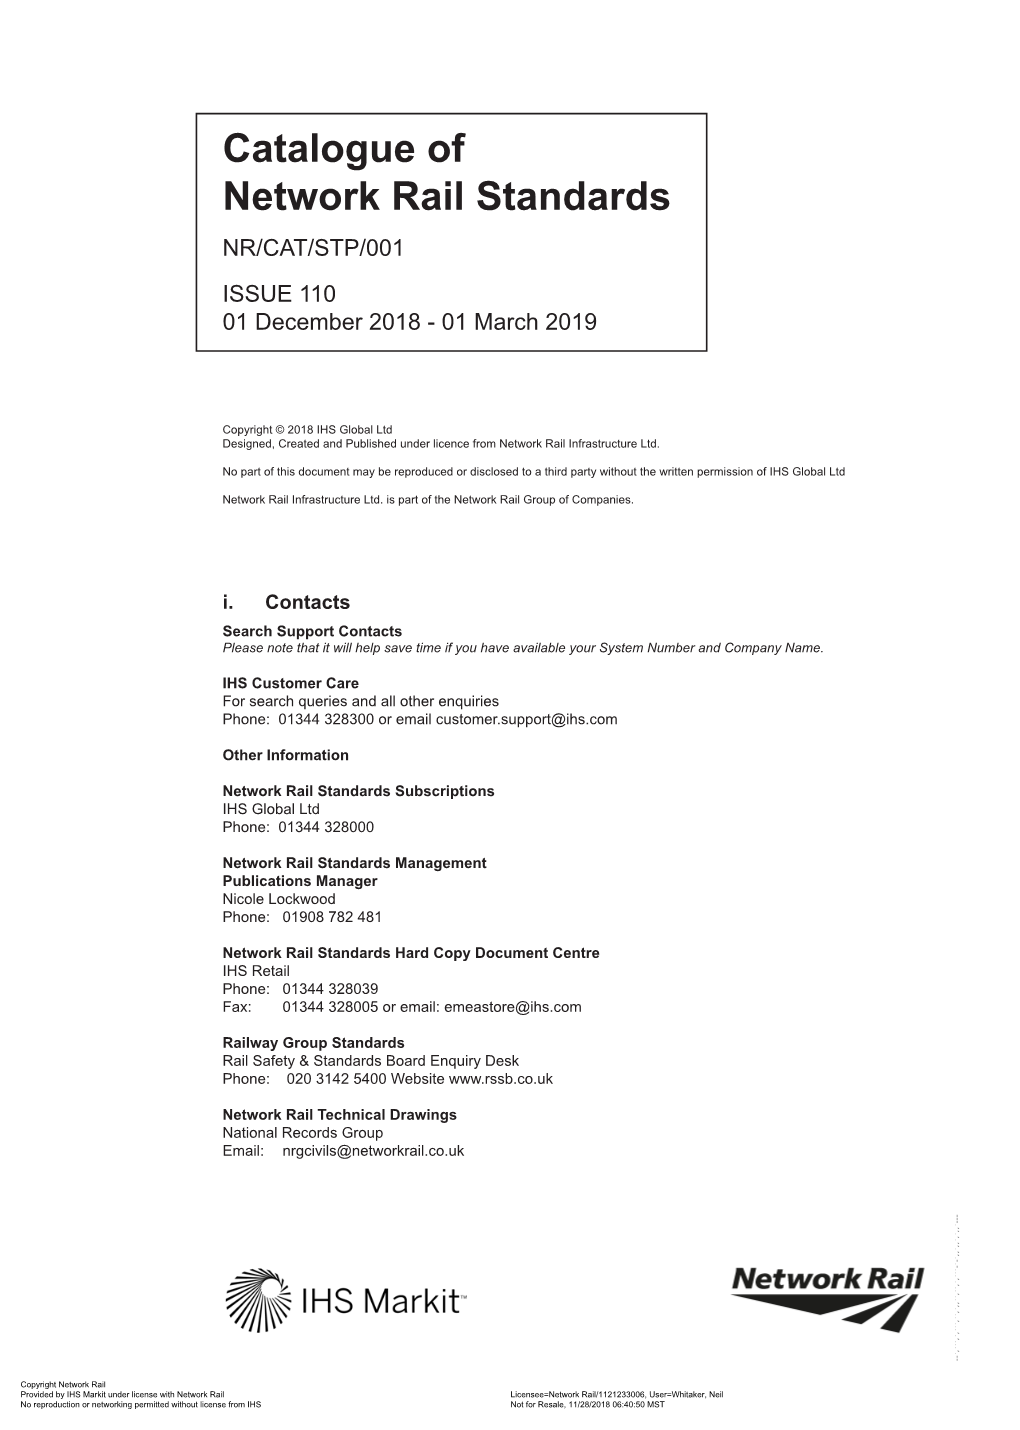 Catalogue of Network Rail Standards NR/CAT/STP/001 ISSUE 110 01 December 2018 - 01 March 2019